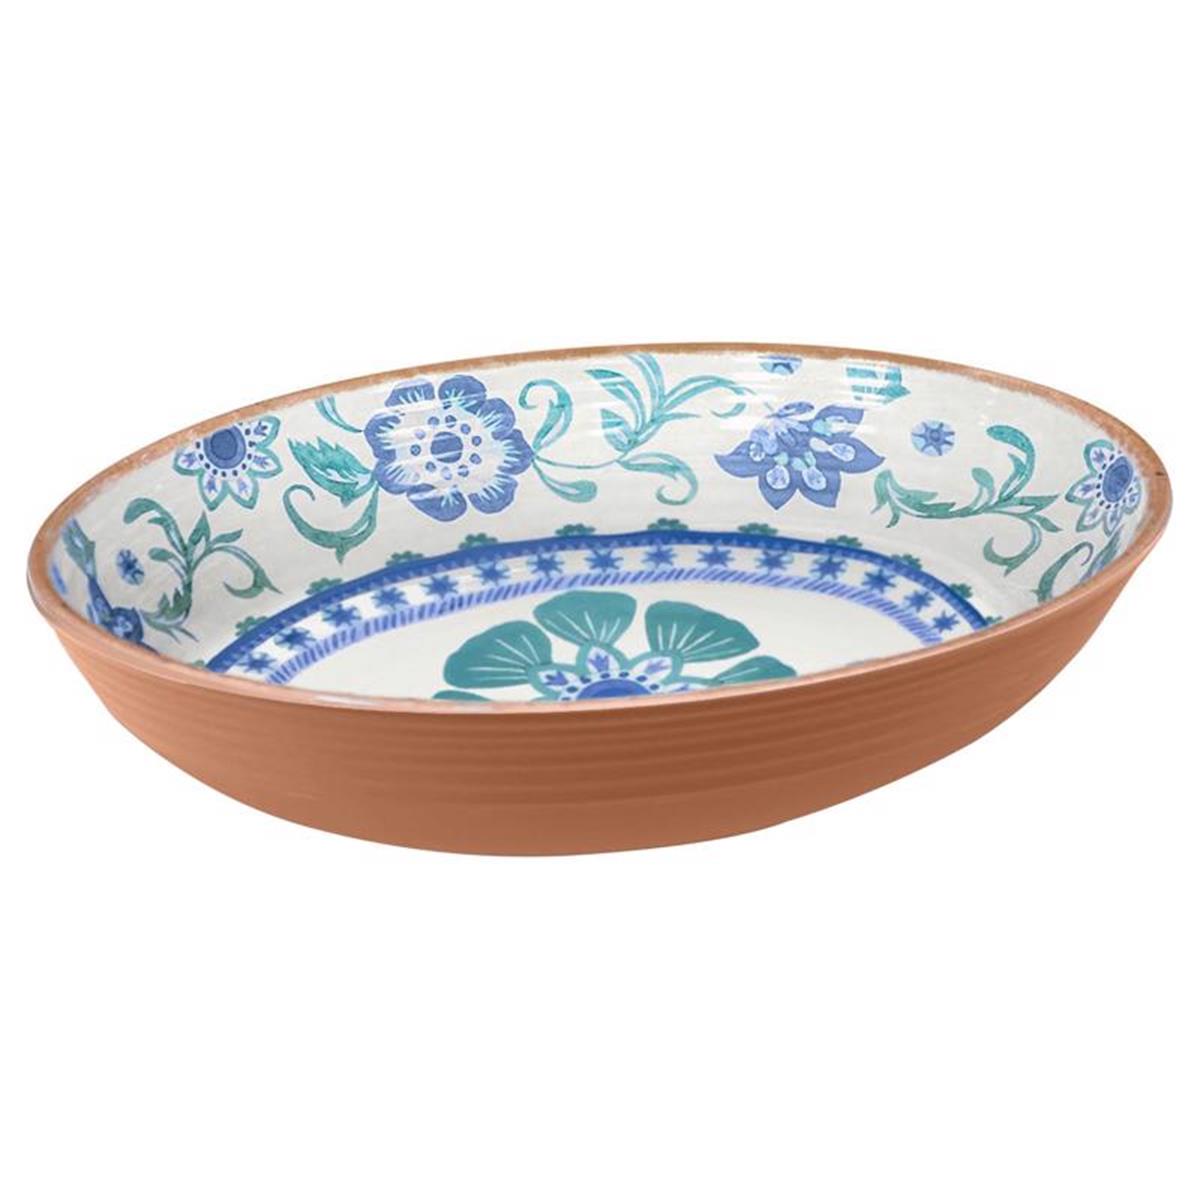 Picture of Tarhong 6060398 91.3 oz Rio Turquoise Multicolored Melamine Artisan Serve Bowl